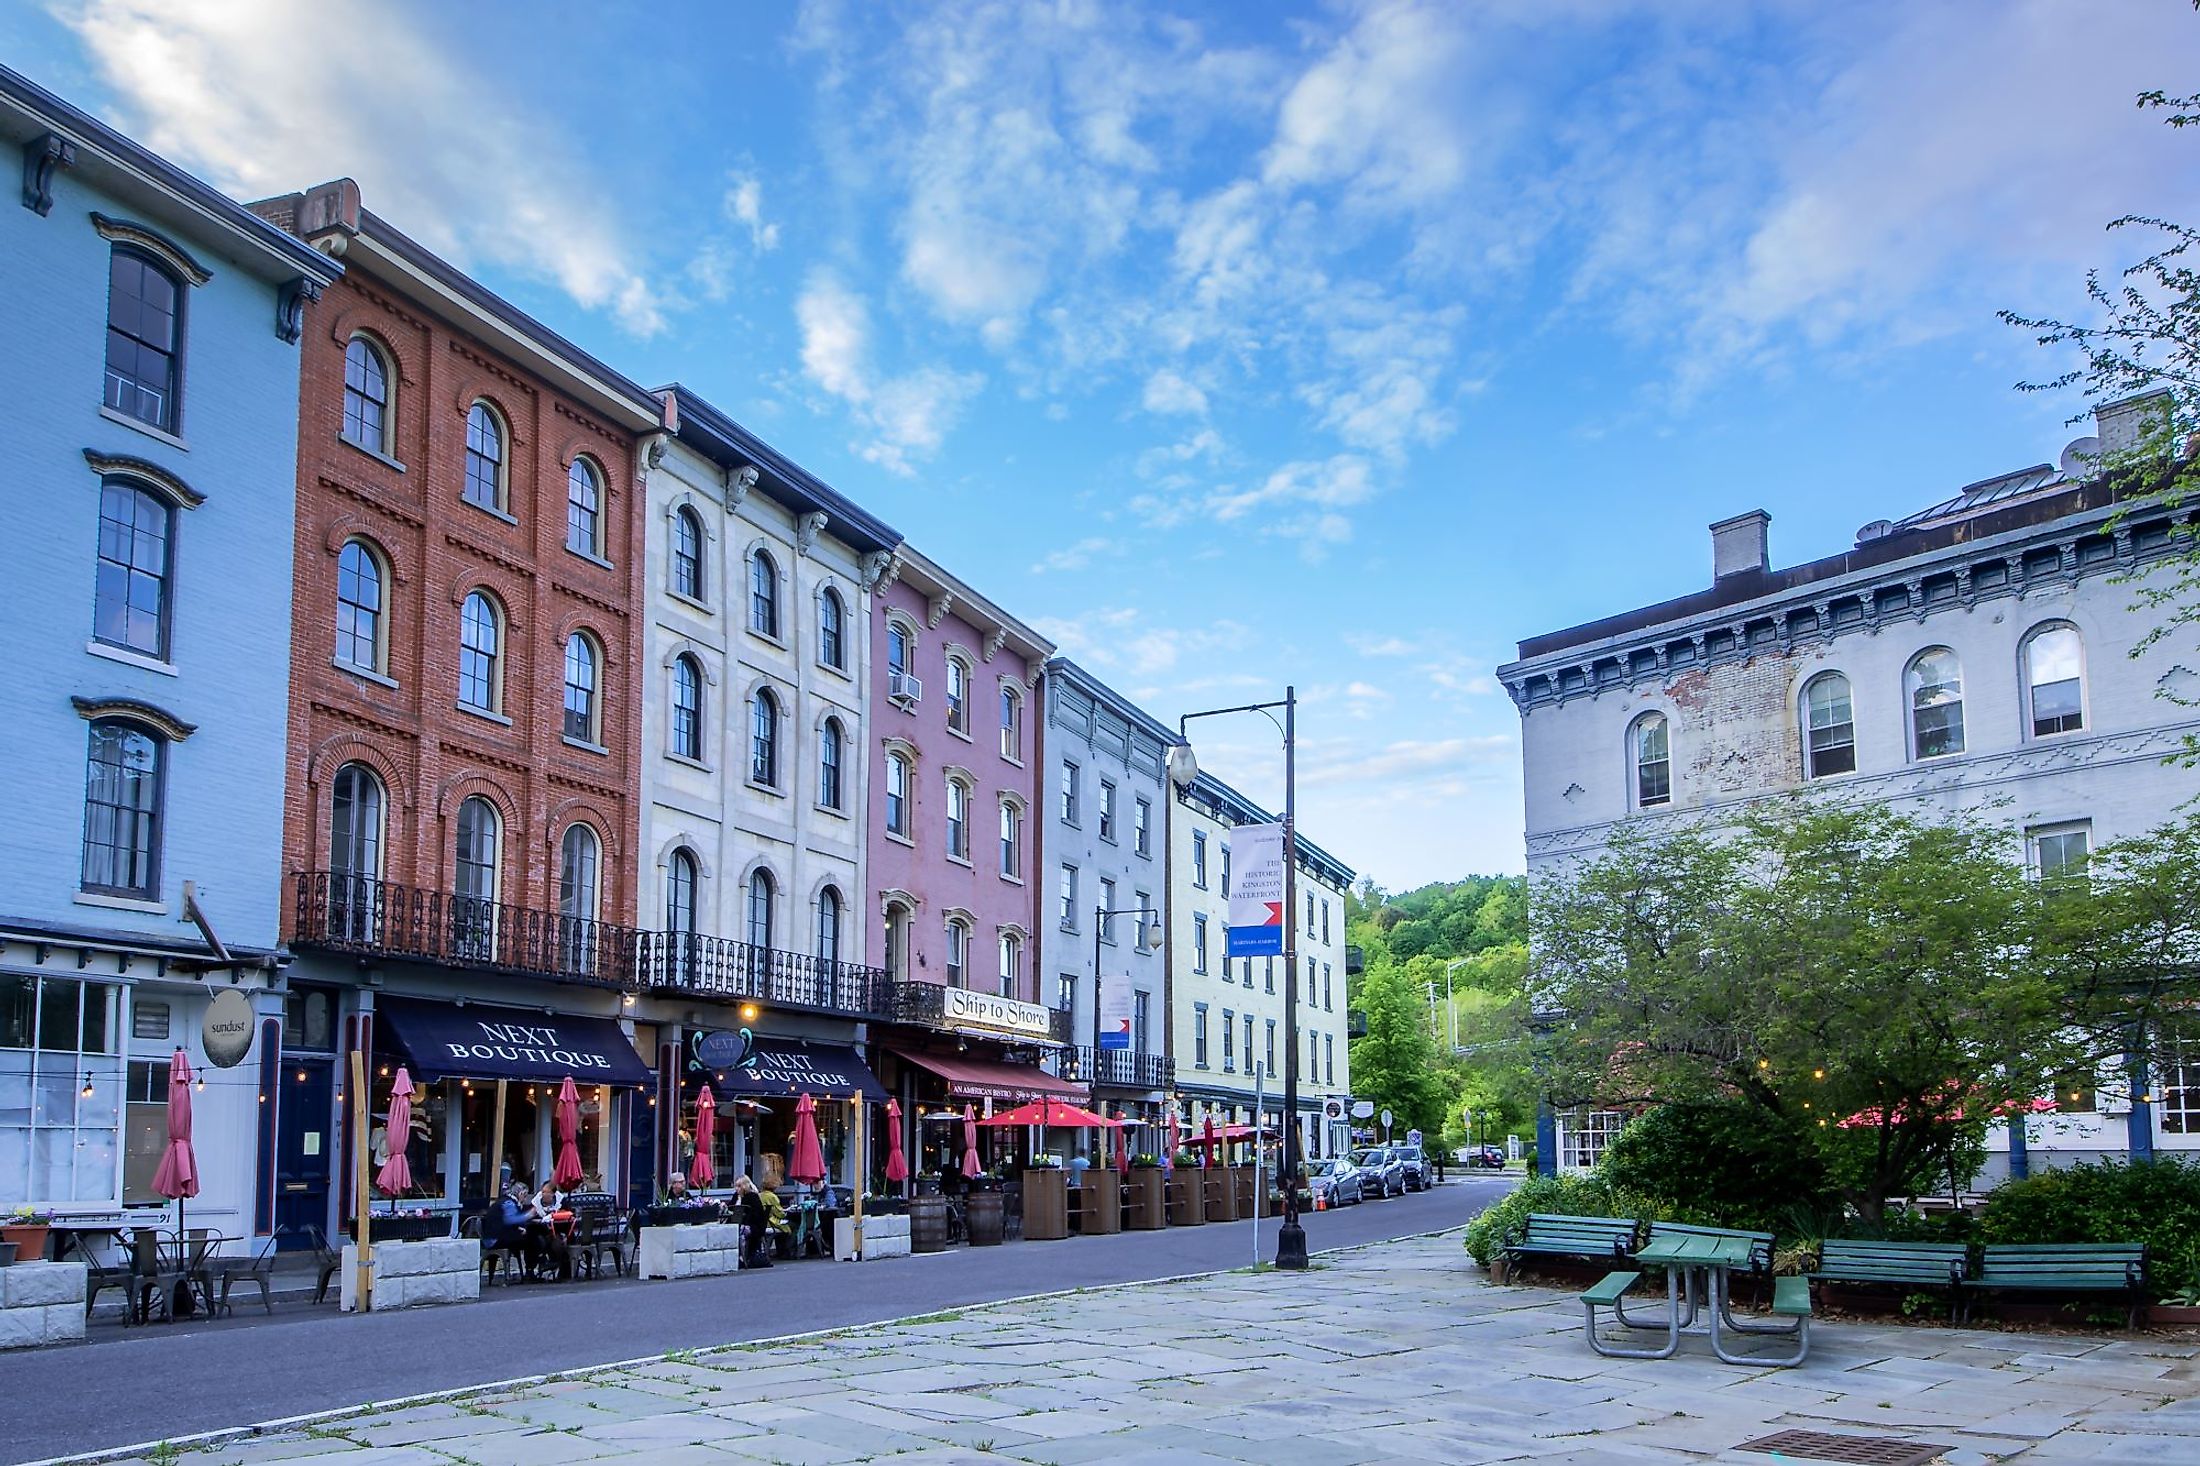 Shops and restaurants in West Strand Street in the Rondout, Kingston, New York. Editorial credit: Brian Logan Photography / Shutterstock.com